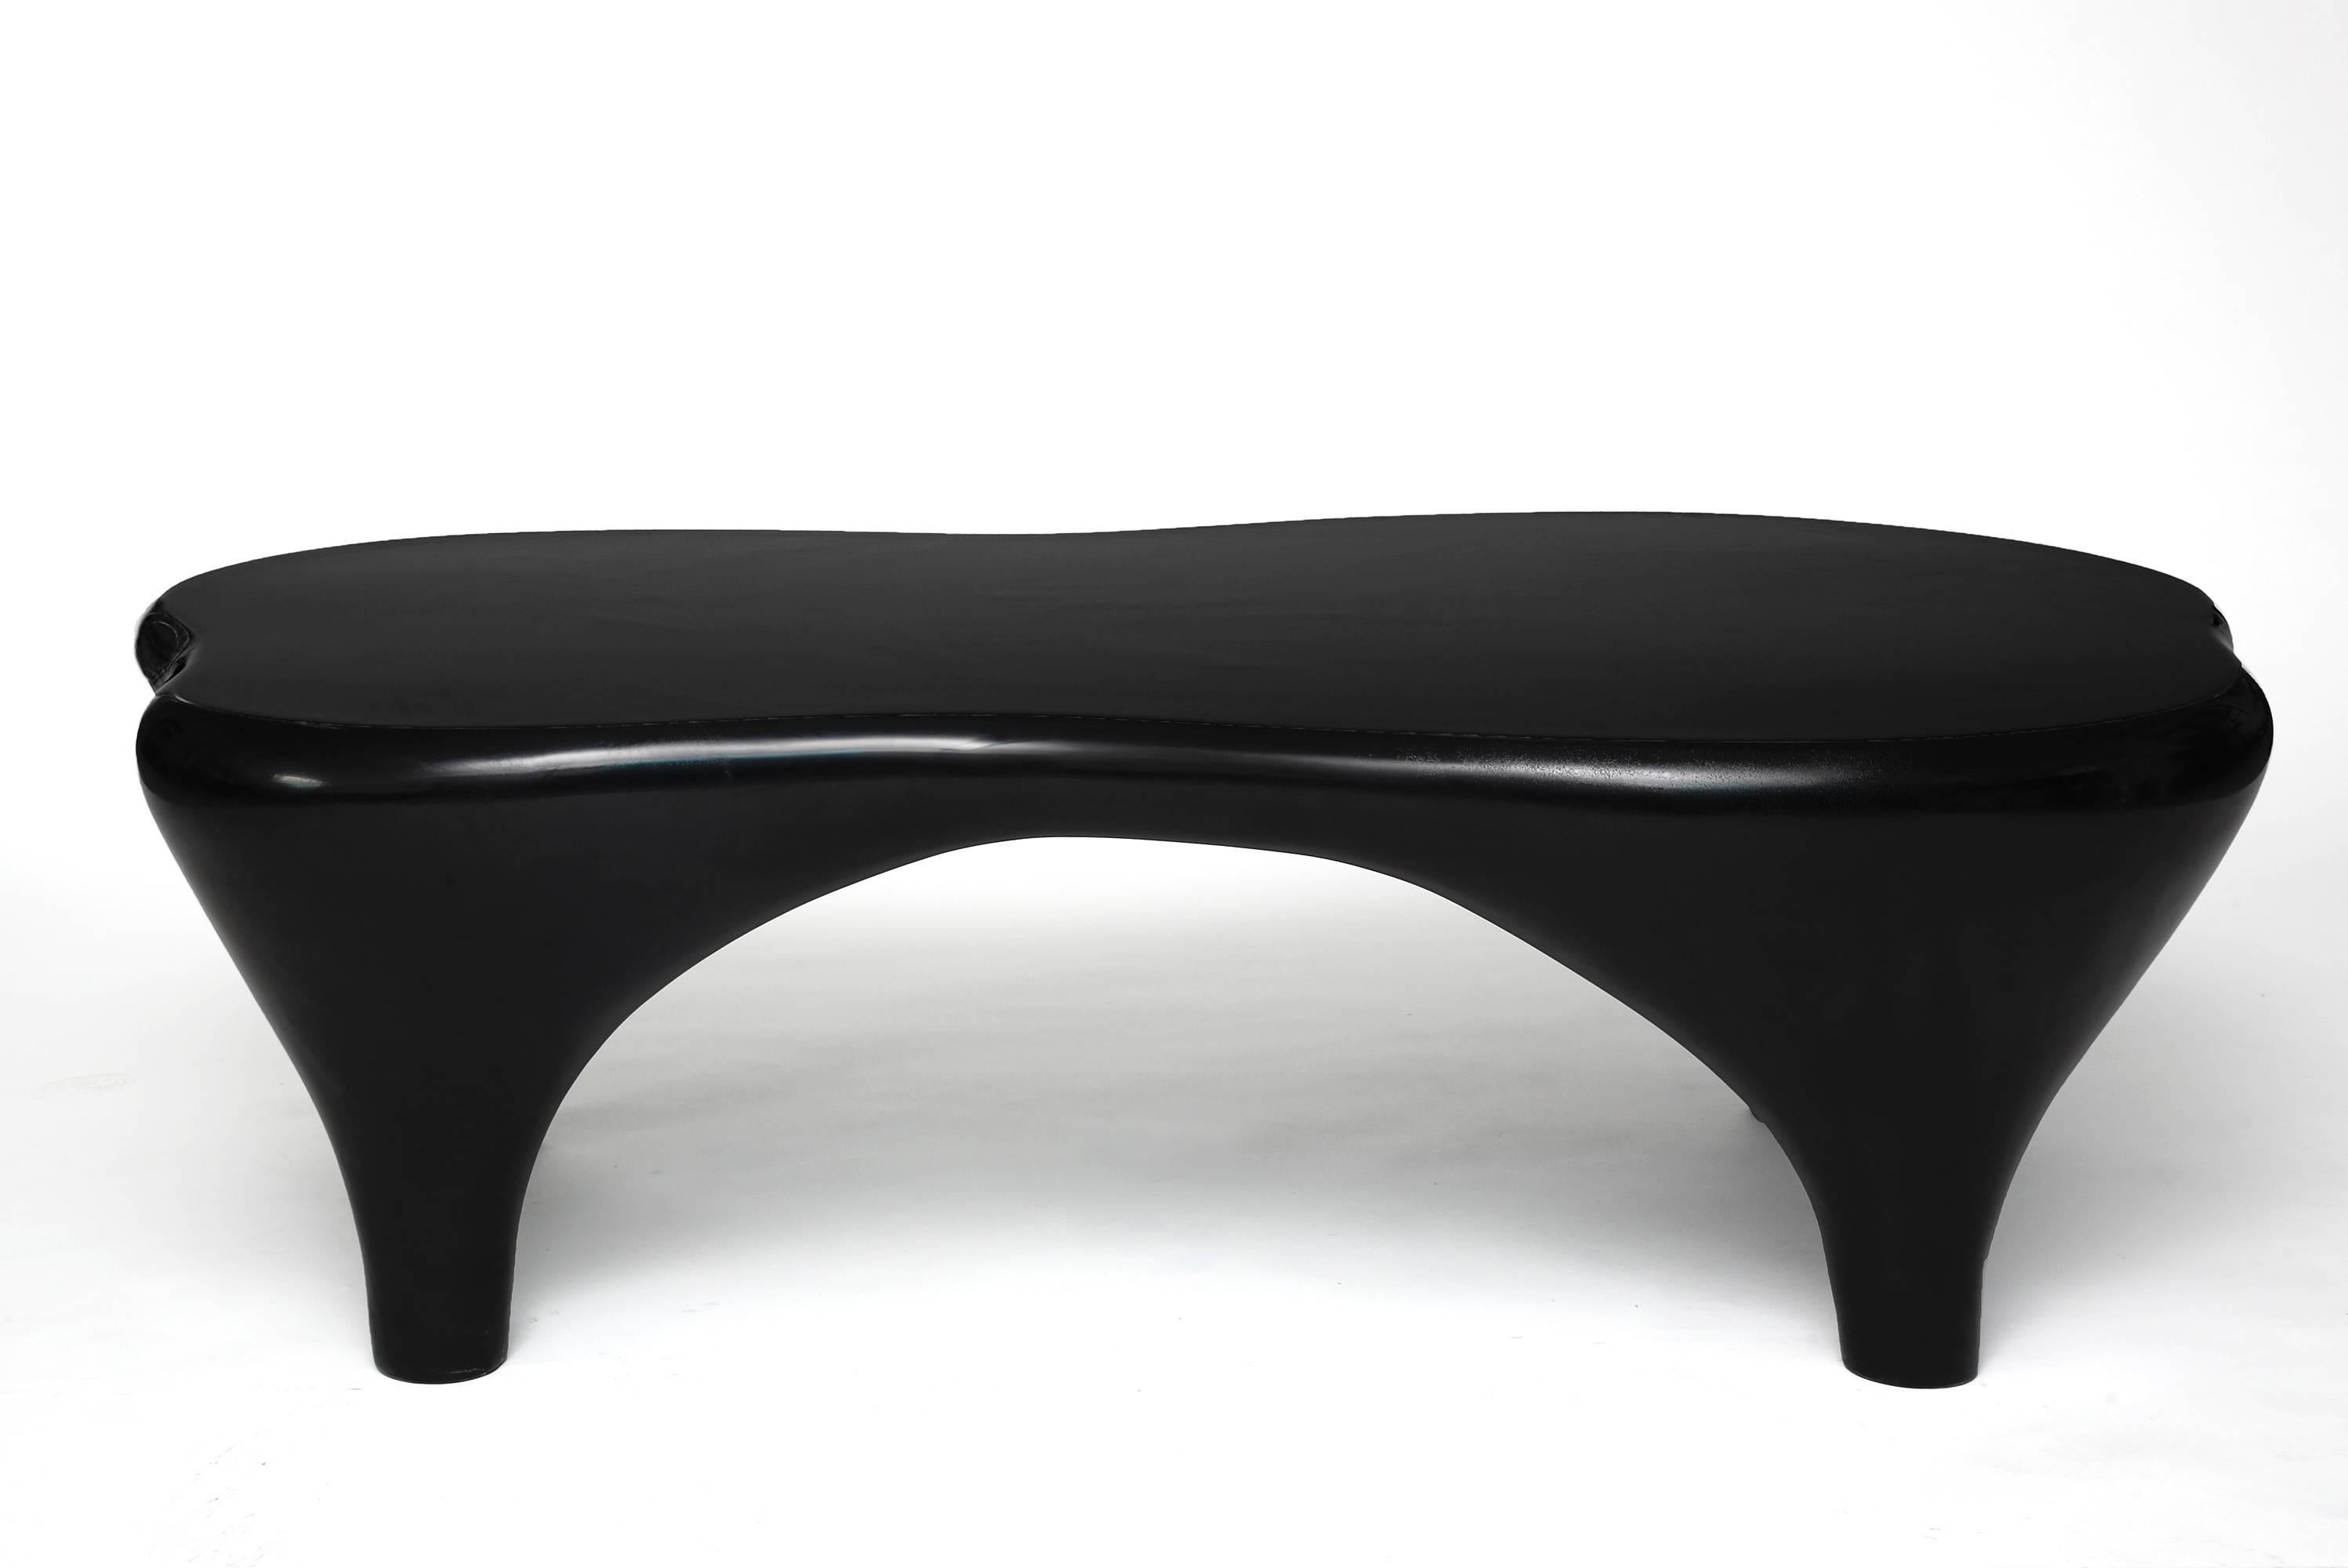 French Hand Lacquer Sculptural Coffee Table by Jacques Jarrige, 2015 For Sale